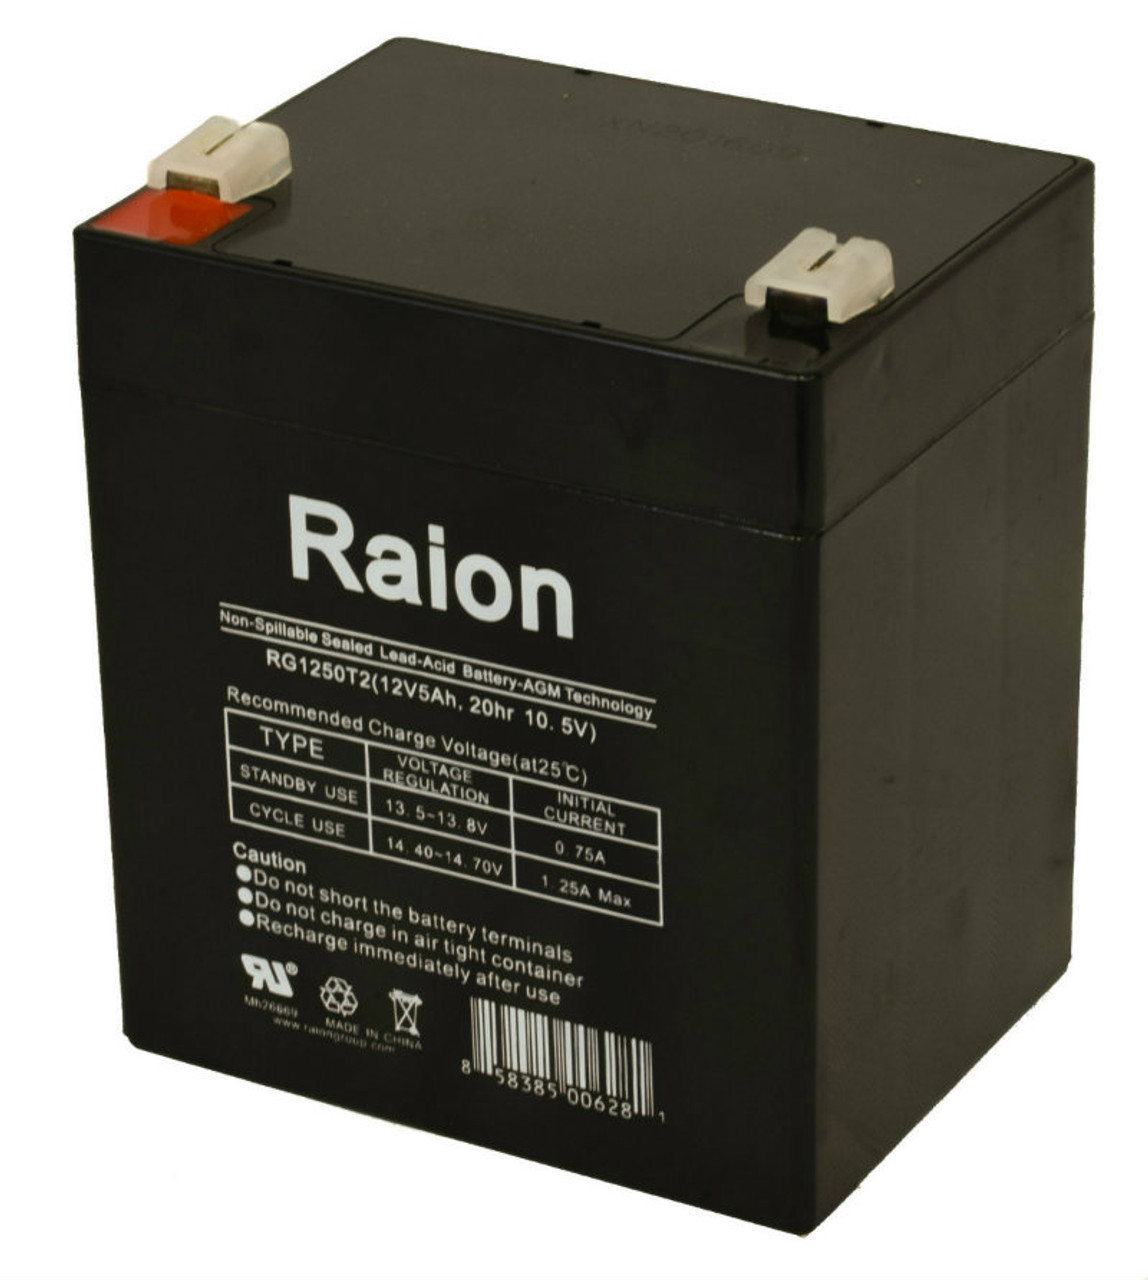 Raion Power RG1250T1 Replacement Alarm Security System Battery for Ademco Vista 30PSE